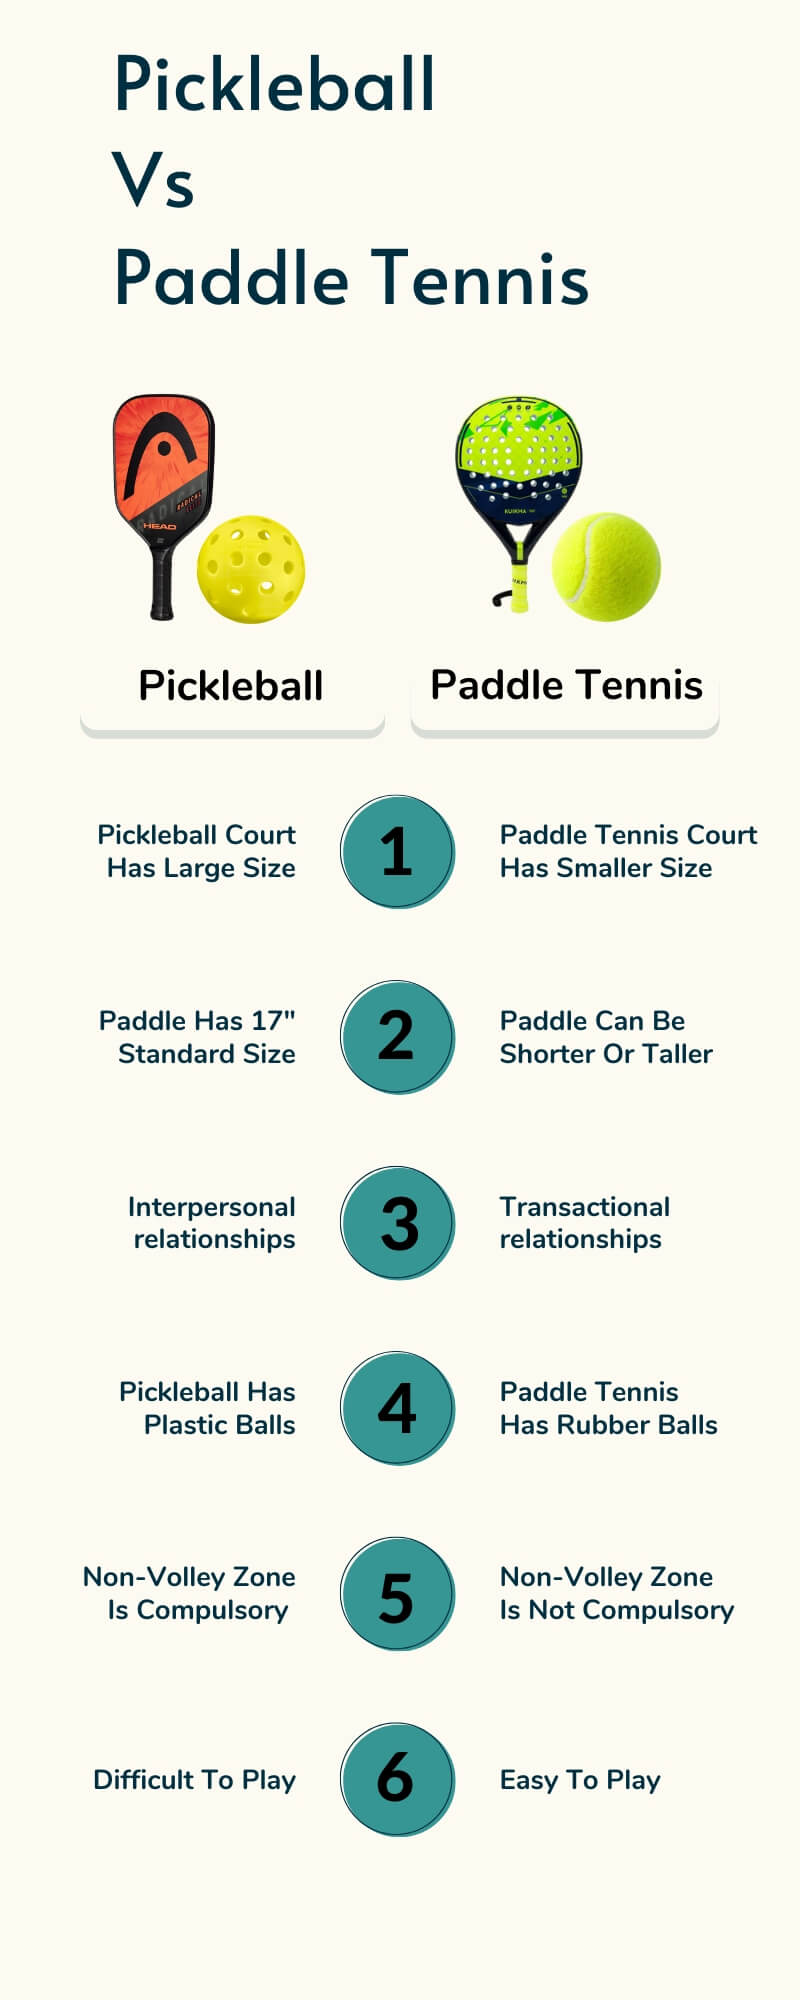 Paddle Tennis Vs Pickleball, Difference Between Pickleball And Paddle Tennis